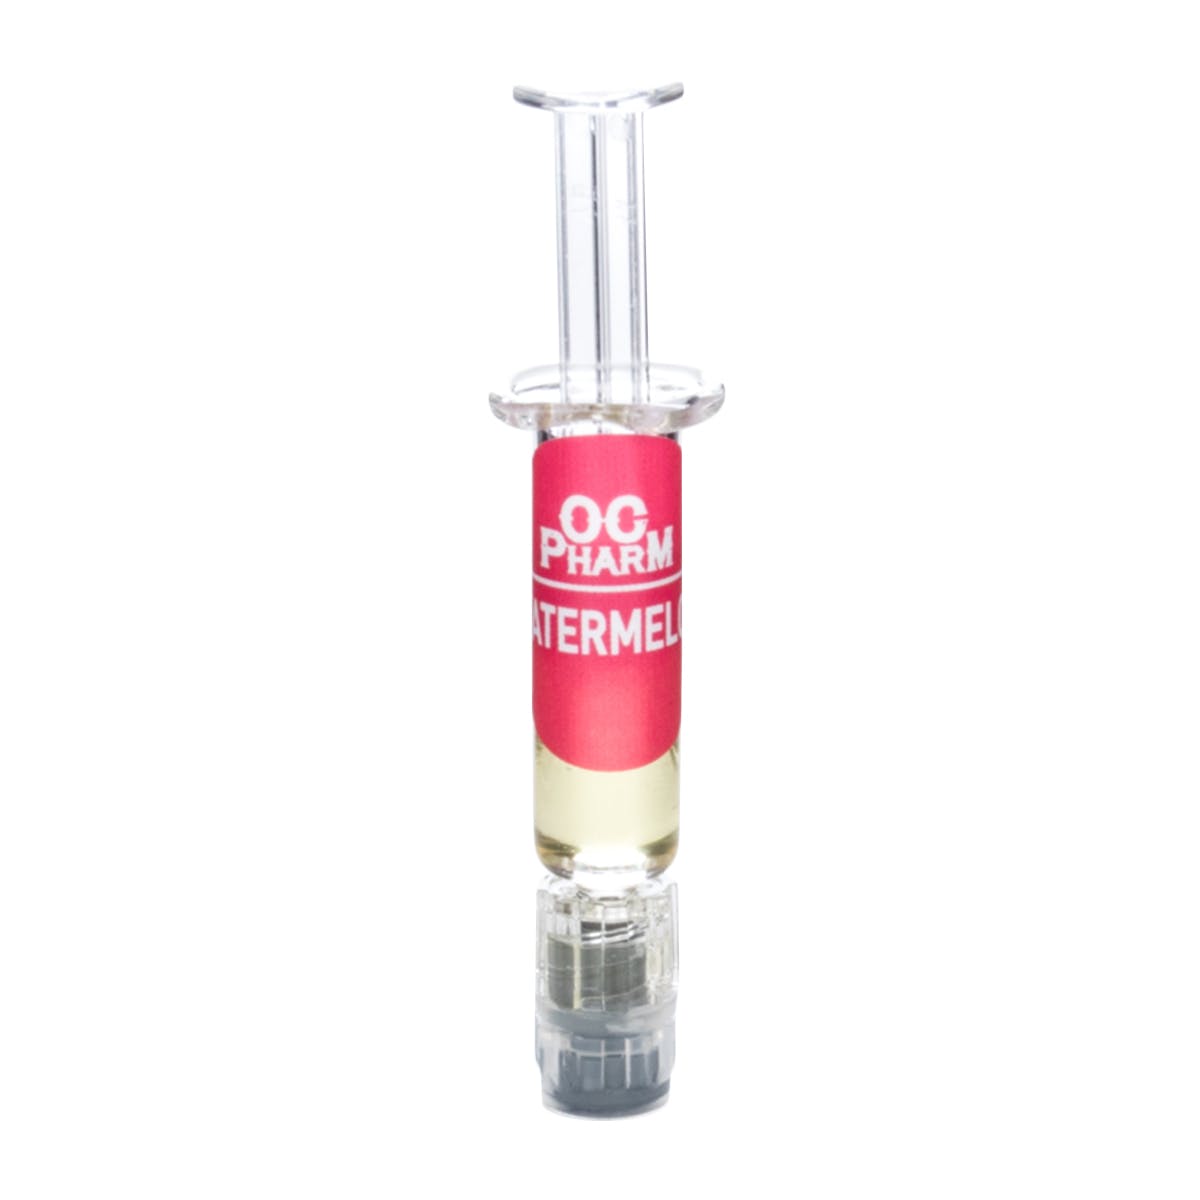 concentrate-oc-pharm-watermelon-prefilled-syringe